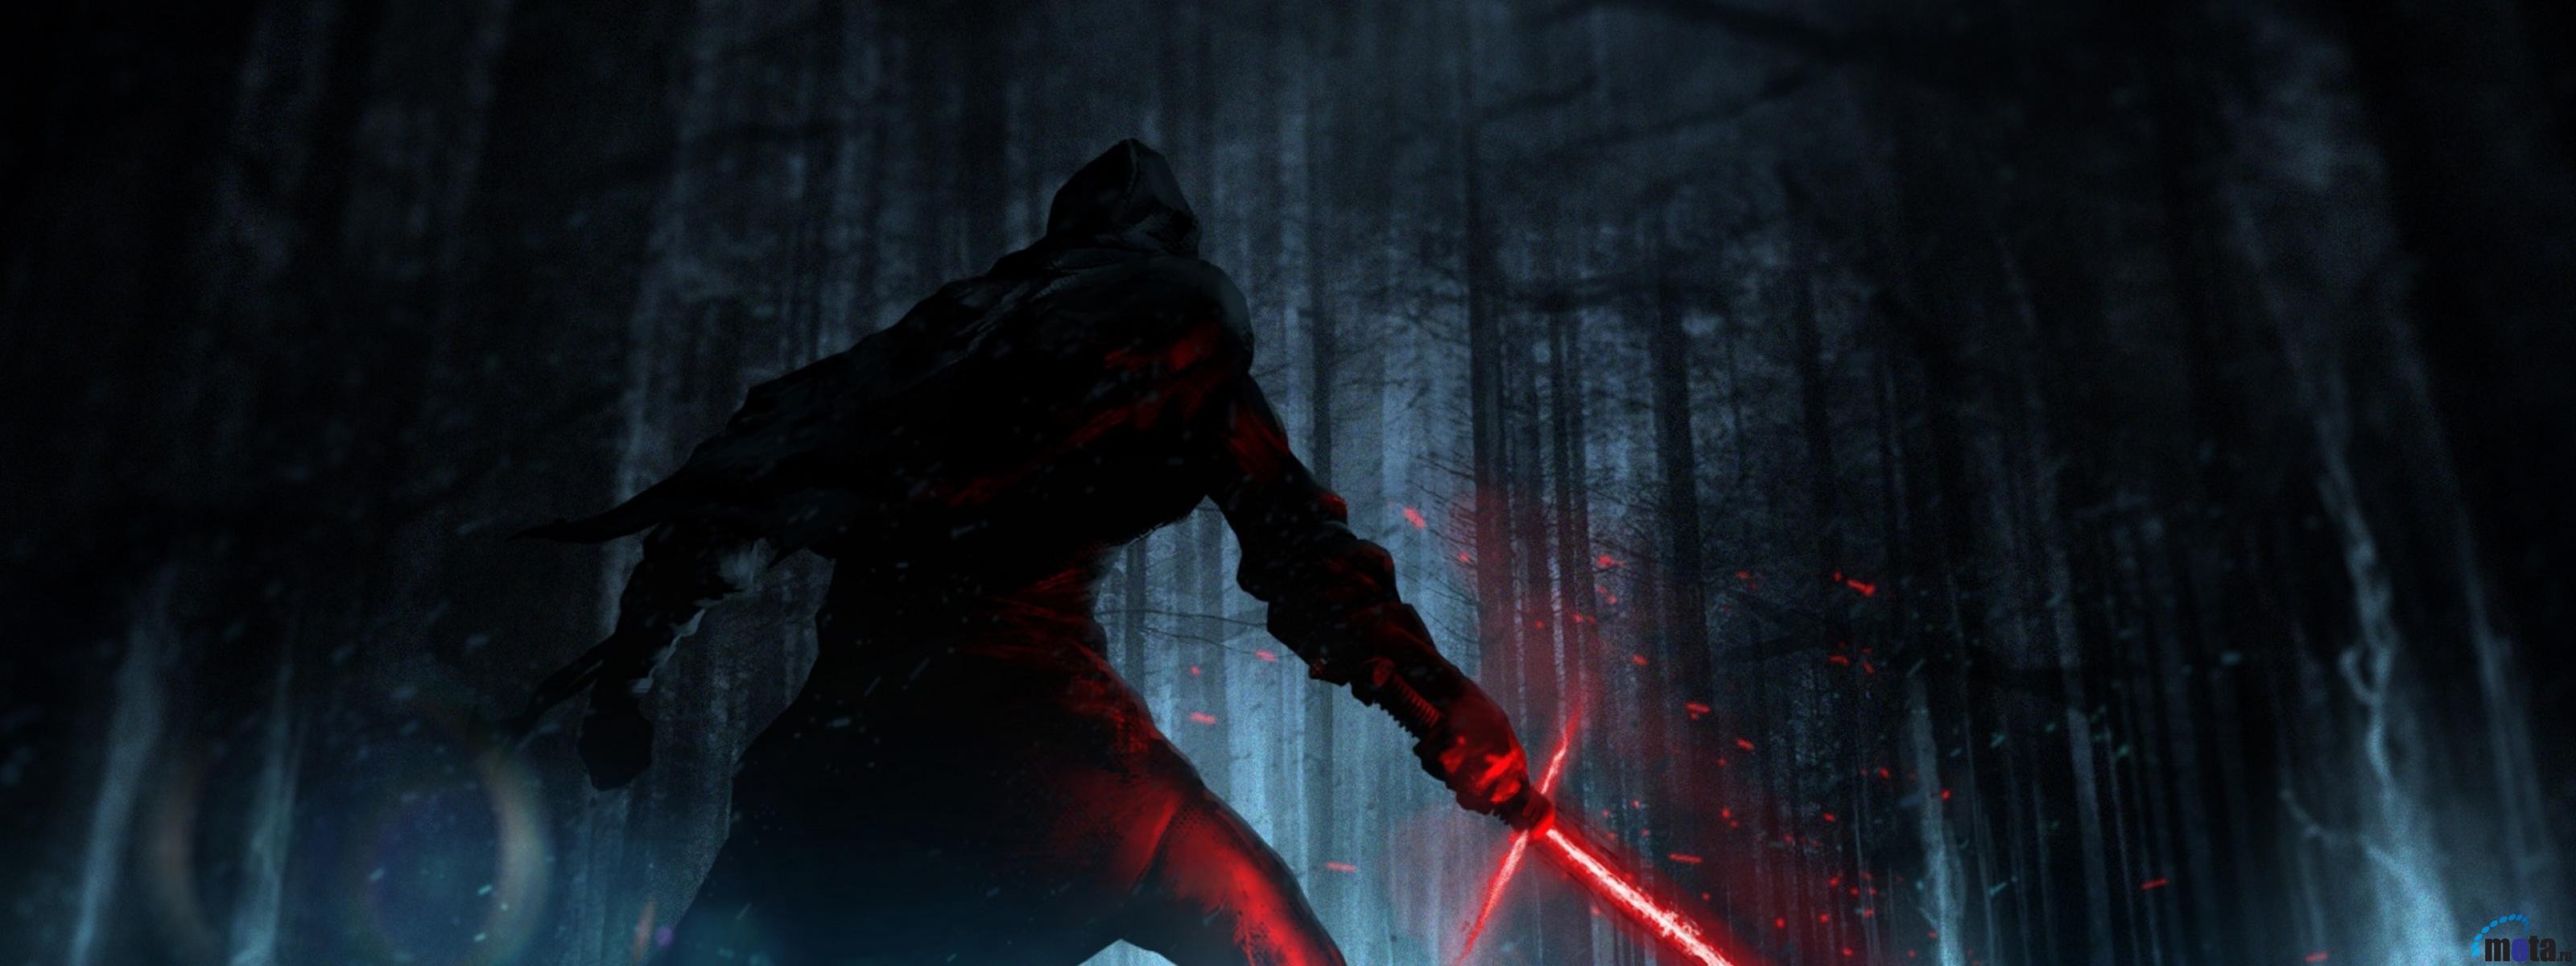 star wars dual monitor wallpaper,action adventure game,darkness,screenshot,fictional character,pc game